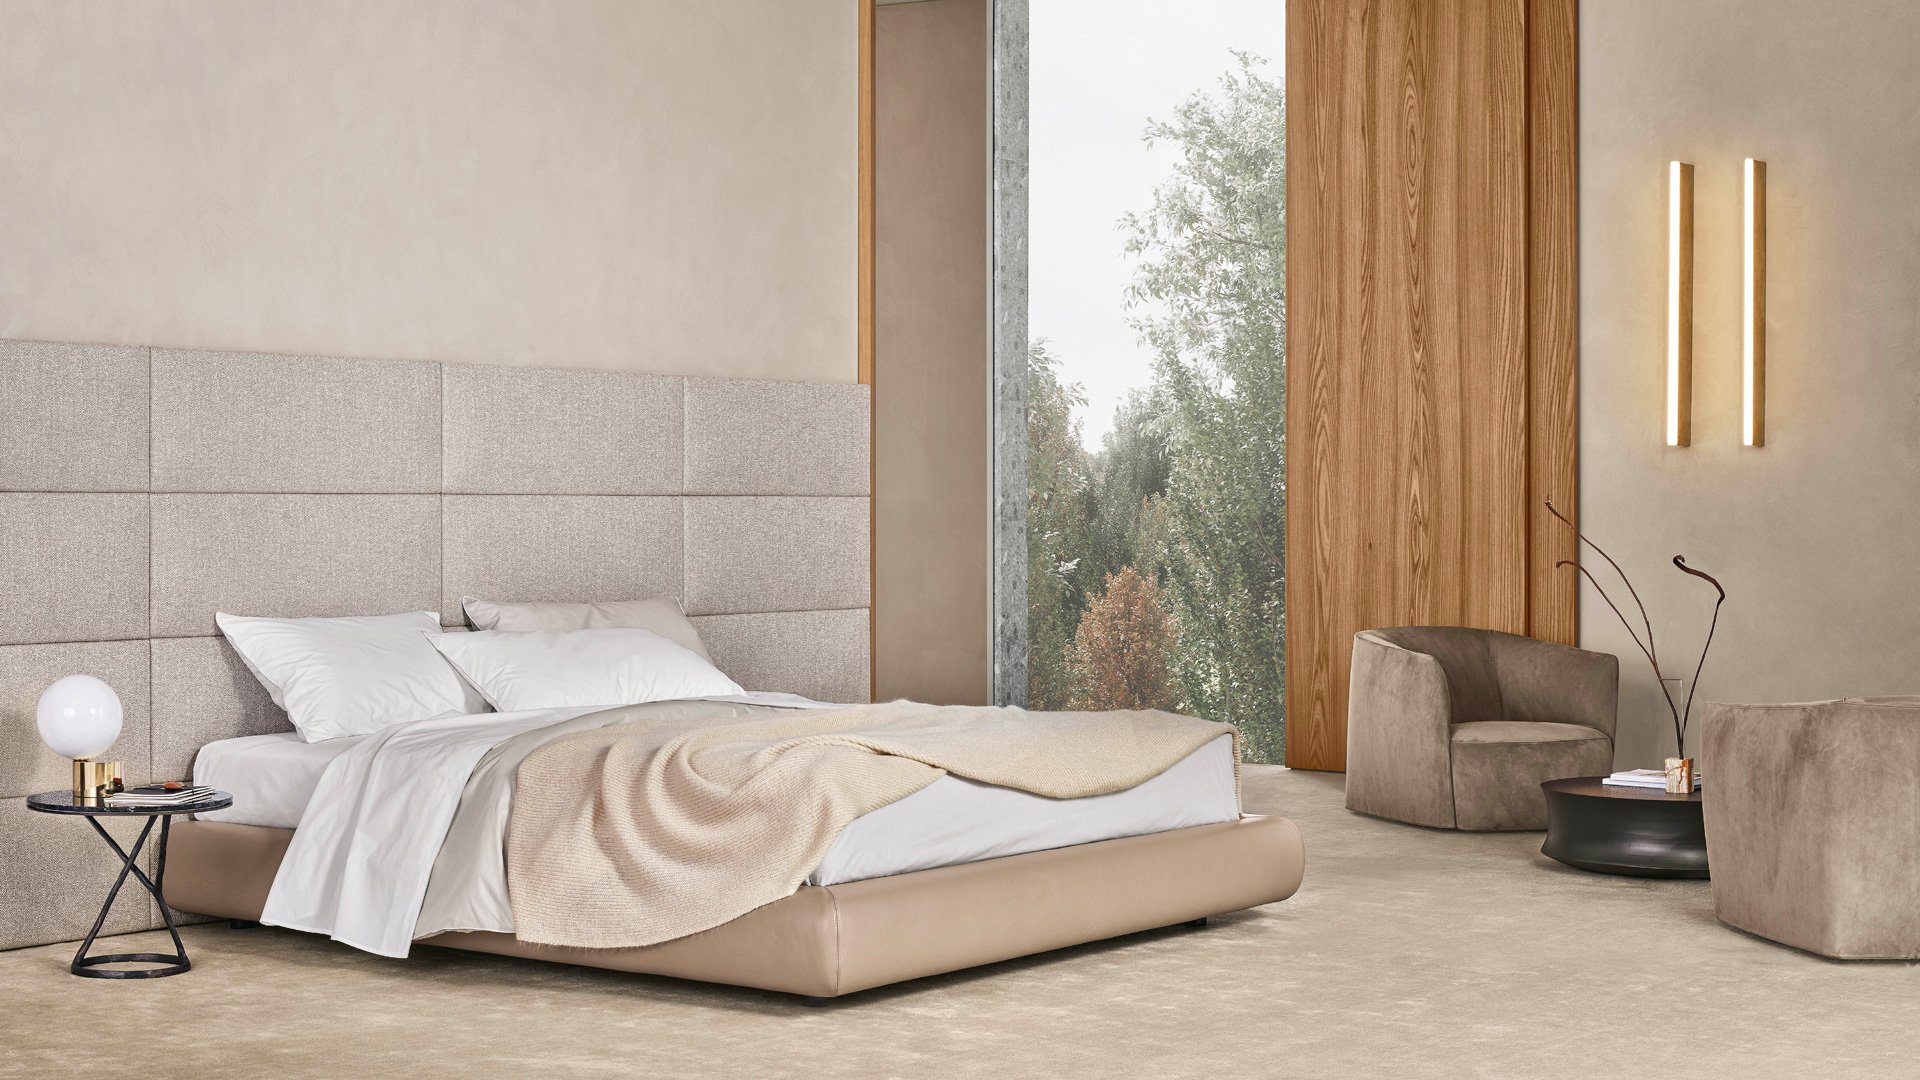 Poliform beds bedroom furniture italian cyprus Takis Angelides Furnihome beds with storage